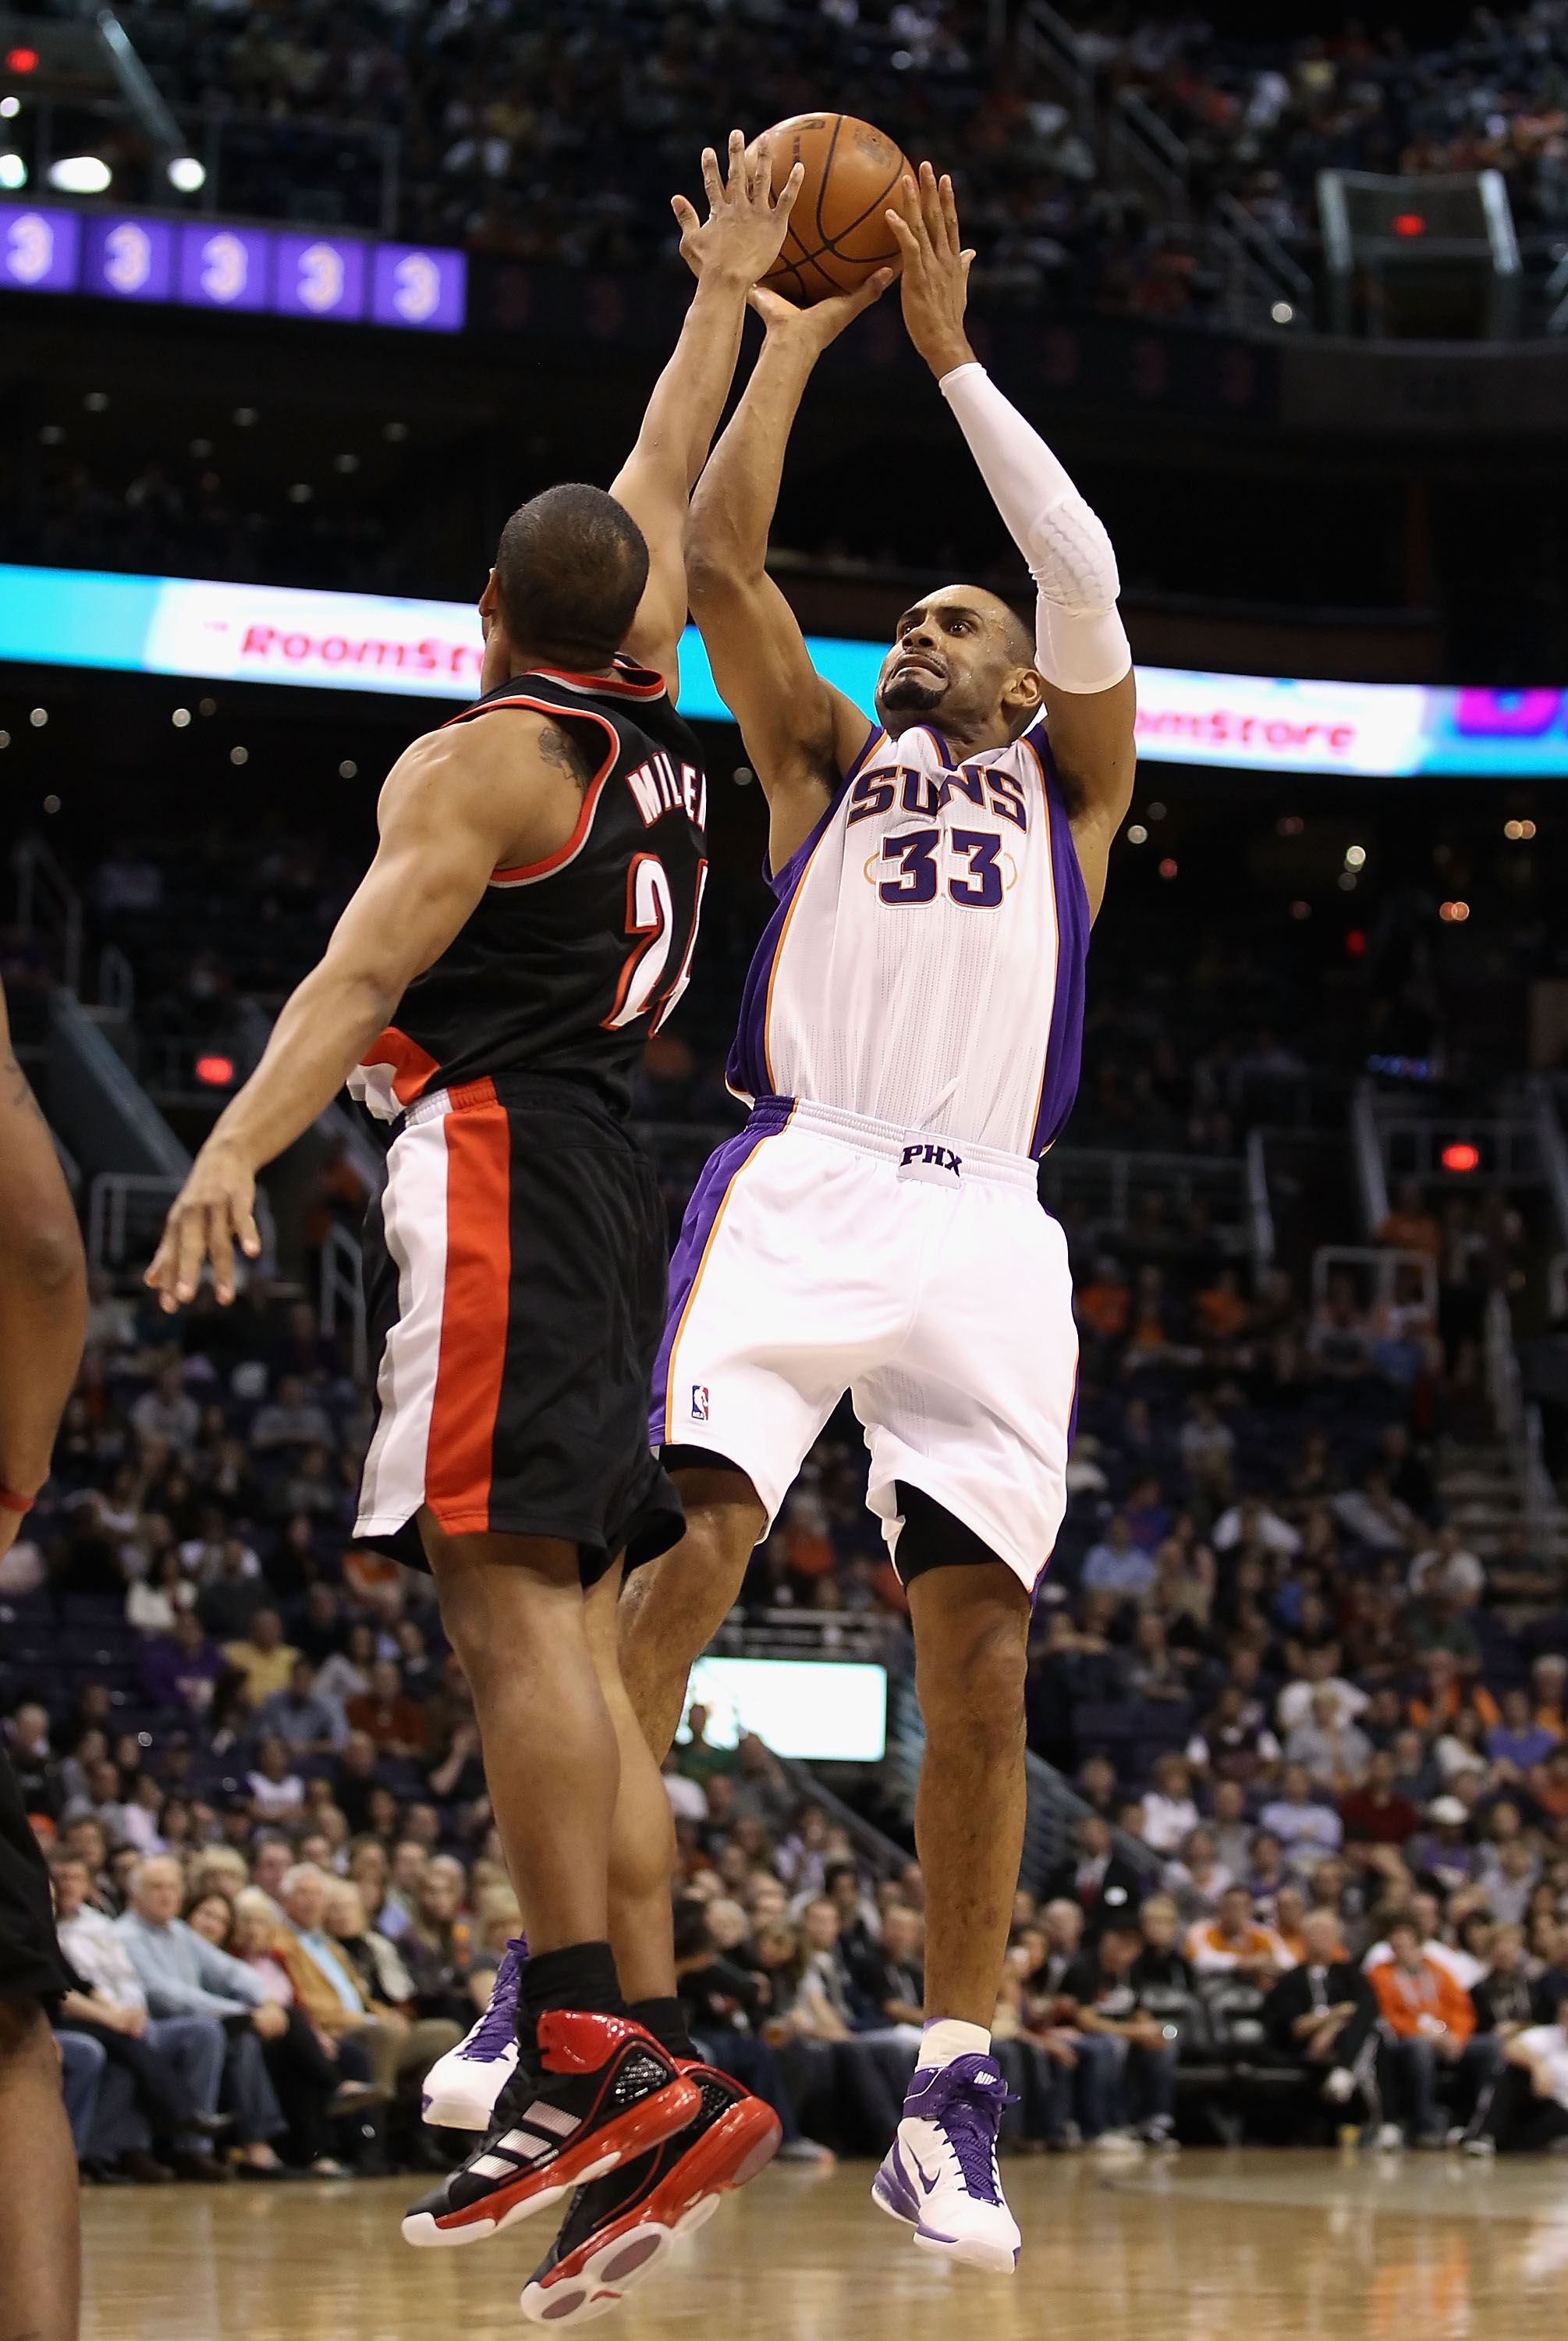 PHOENIX, AZ - JANUARY 14:  Grant Hill #33 of the Phoenix Suns puts up a shot over Andre Miller #24 of the Portland Trail Blazers during the NBA game at US Airways Center on January 14, 2011 in Phoenix, Arizona. The Suns defeated the Trail Blazers 115-111.